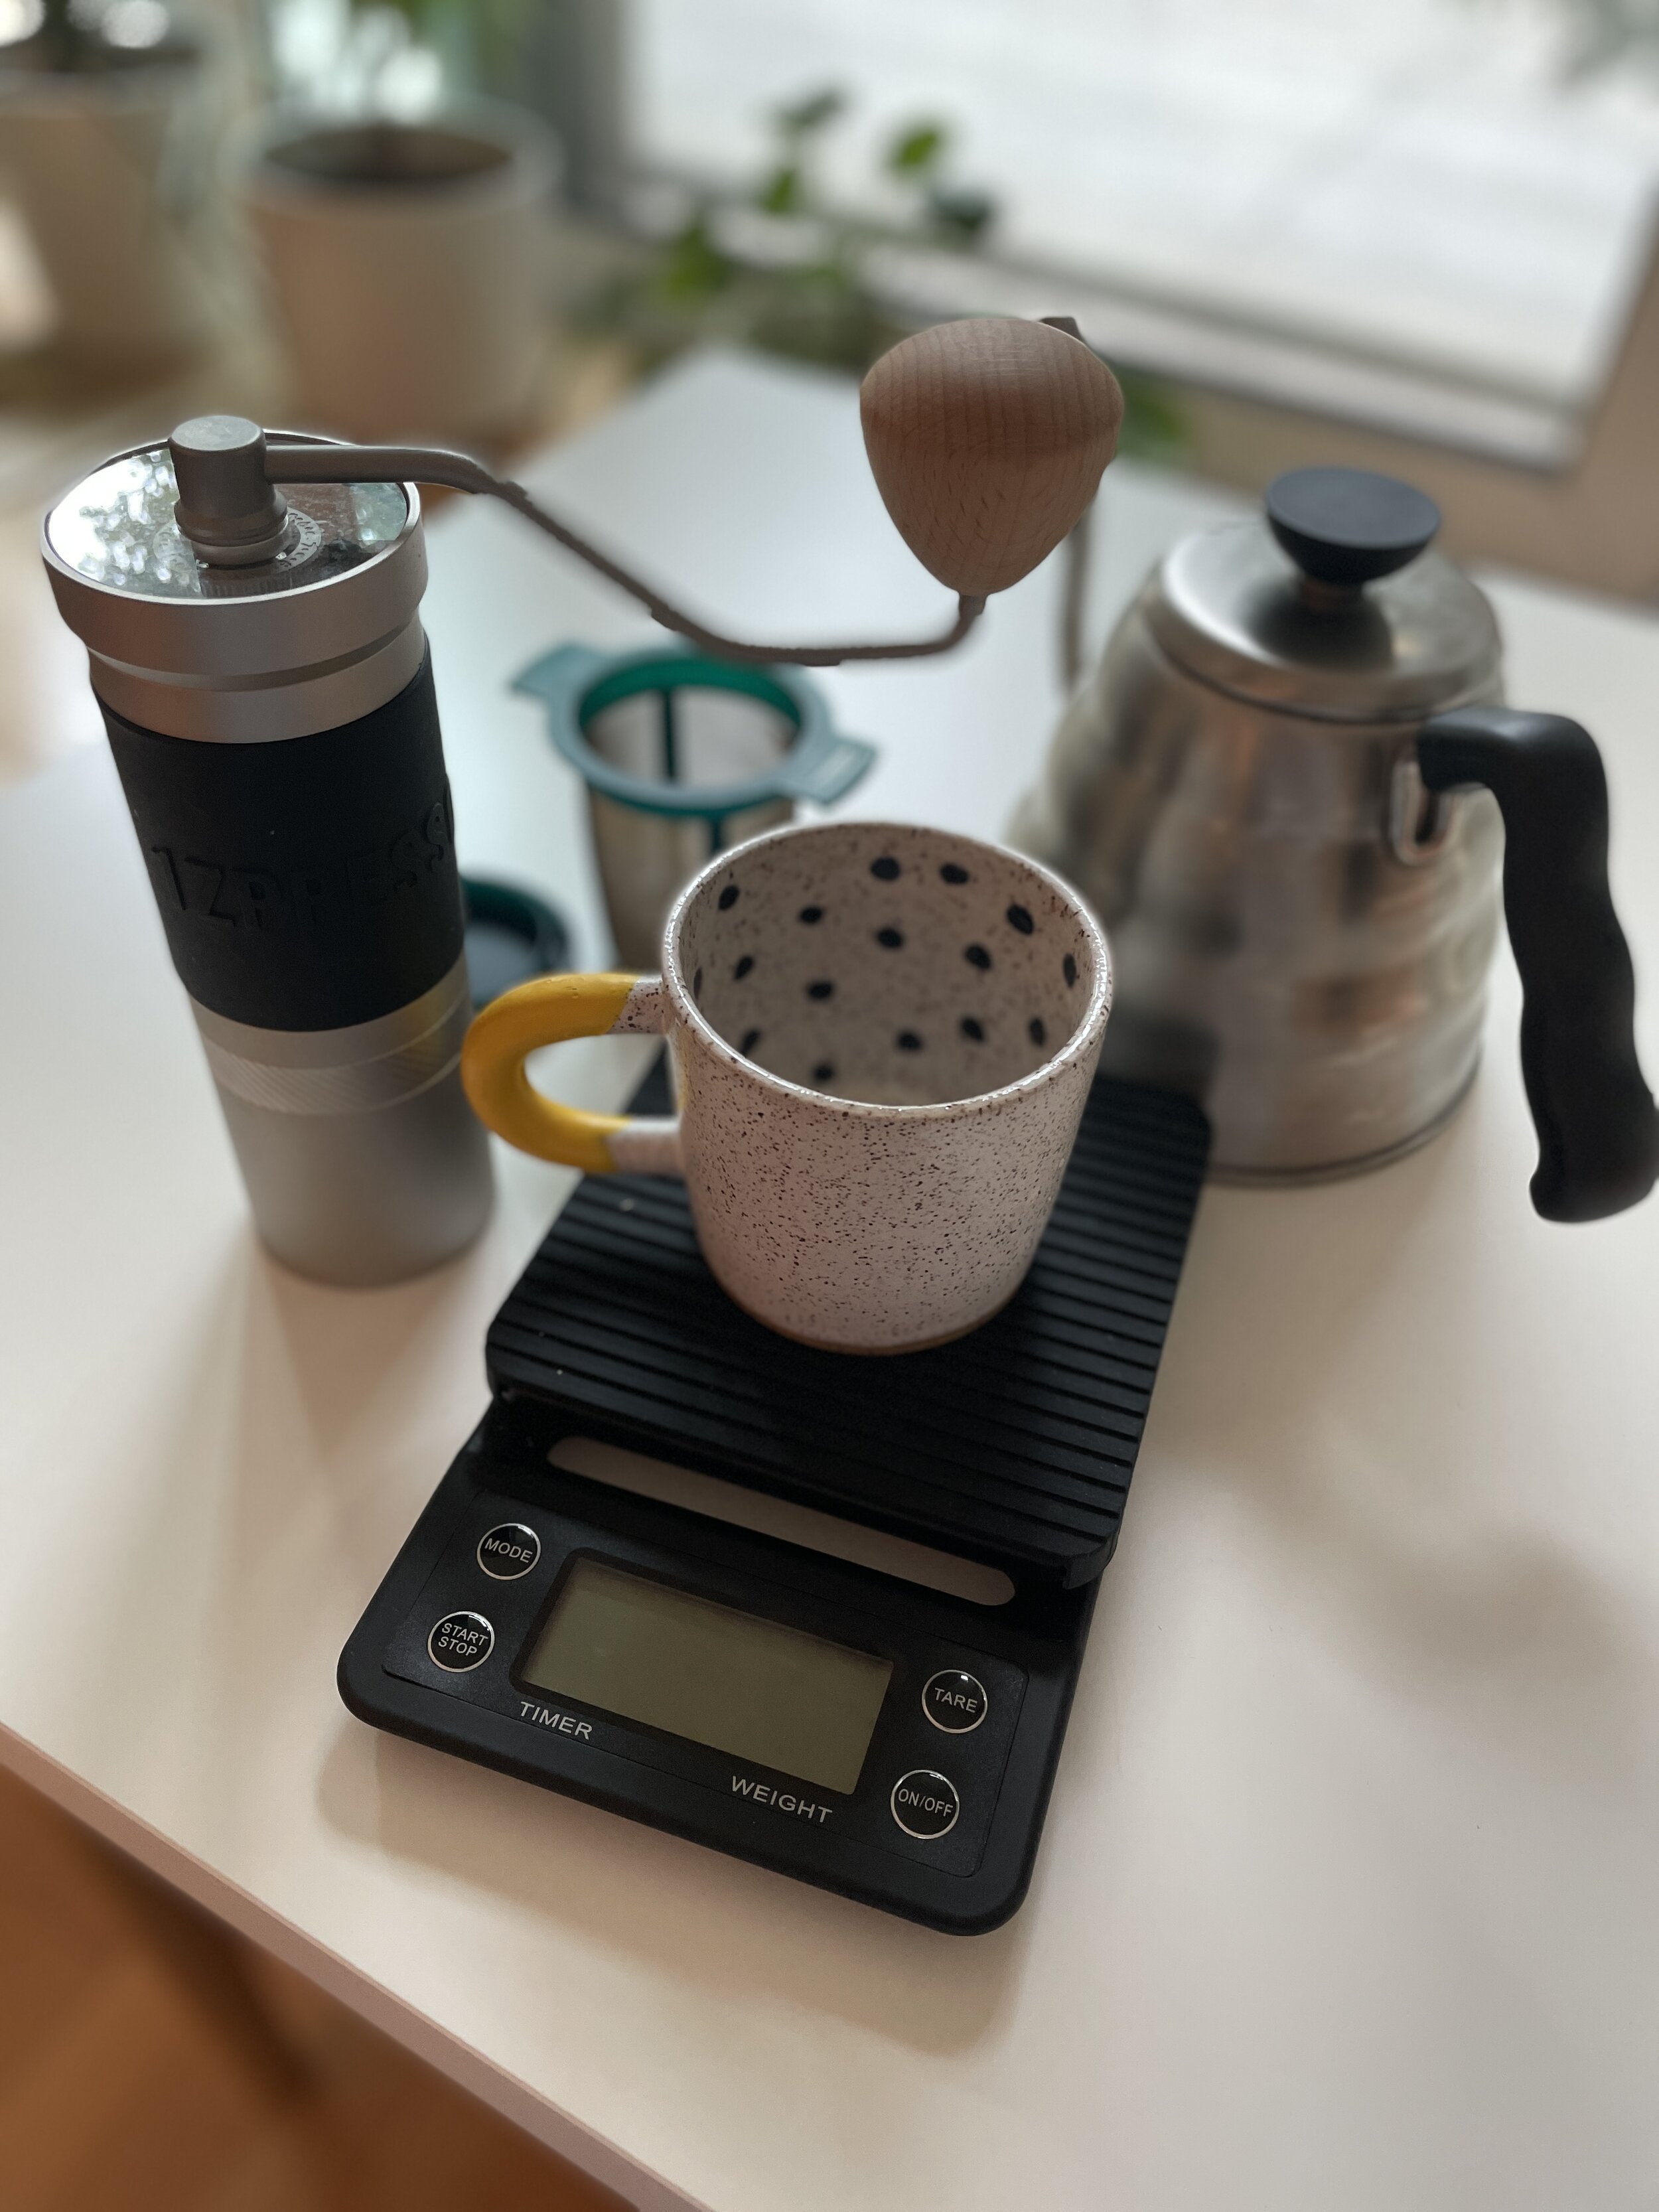 DRIP COFFEE BREWING TECHINIQUE : 3 STAGES ON BREWING - Millilitre